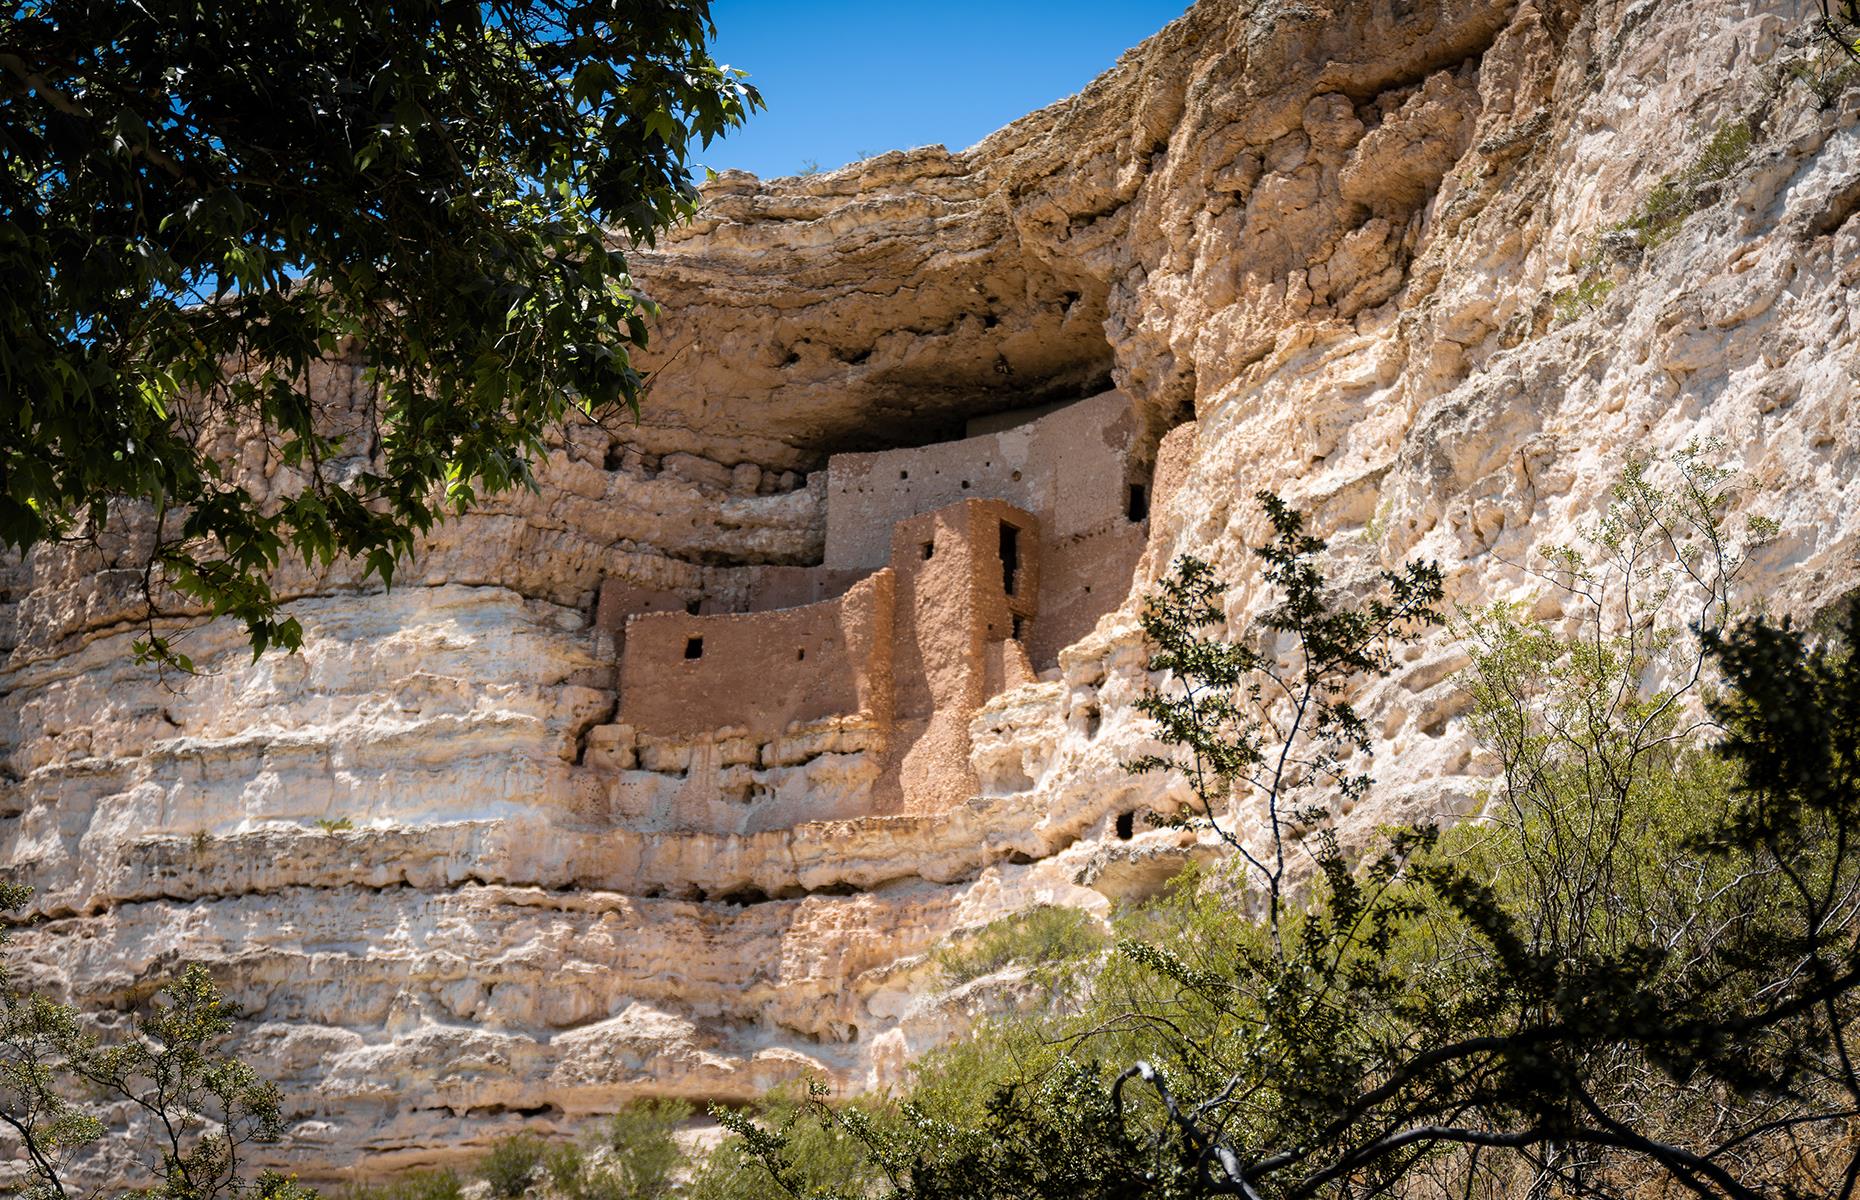 <p>It's no secret Arizona is rich in Native American history and this part of the state is easily accessible from Phoenix. The <a href="https://www.viator.com/en-GB/tours/Phoenix/Day-Tour-to-Sedona-Red-Rock-Country-and-Native-American-Ruins-from-Phoenix/d639-3002SEDONA">small group guided day tour</a> takes in important cultural sites such as the Chapel of the Holy Cross, Bell Rock and Airport Mesa for unbeatable views of the red rocks and Sedona. But perhaps the most fascinating aspect of this tour is a visit to the Montezuma Castle National Monument. Among the most spectacular cliff dwelling ruins in America, Montezuma was built by the Sinagua people between the 12th and 15th centuries. The tours are led by knowledgeable guides who offer fascinating historic insights and context. Tickets are from $179 with free pick up and drop off.</p>